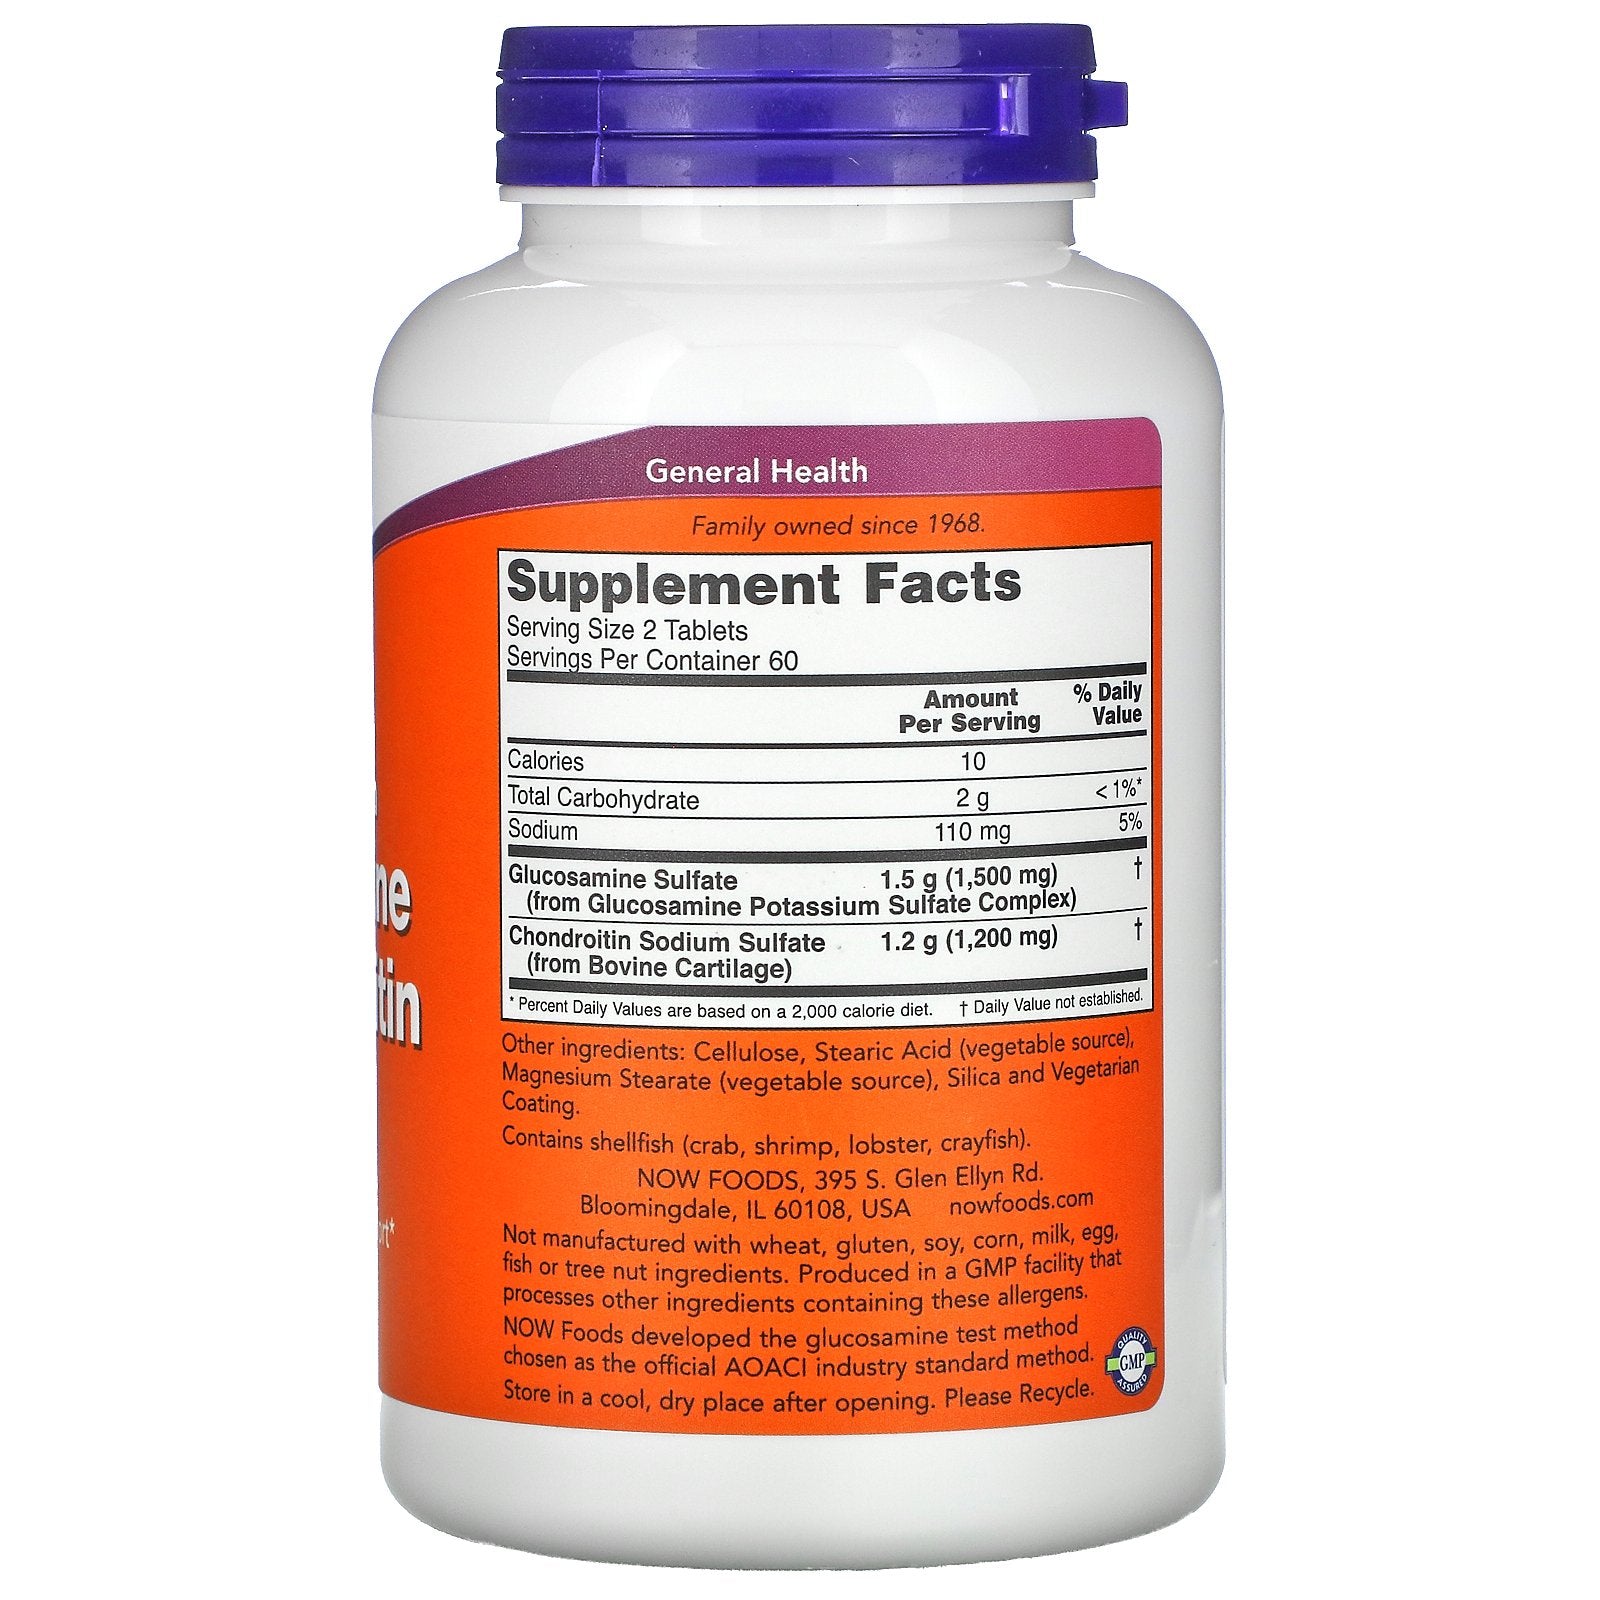 Now Foods, Glucosamine & Chondroitin, Extra Strength, 120 Tablets